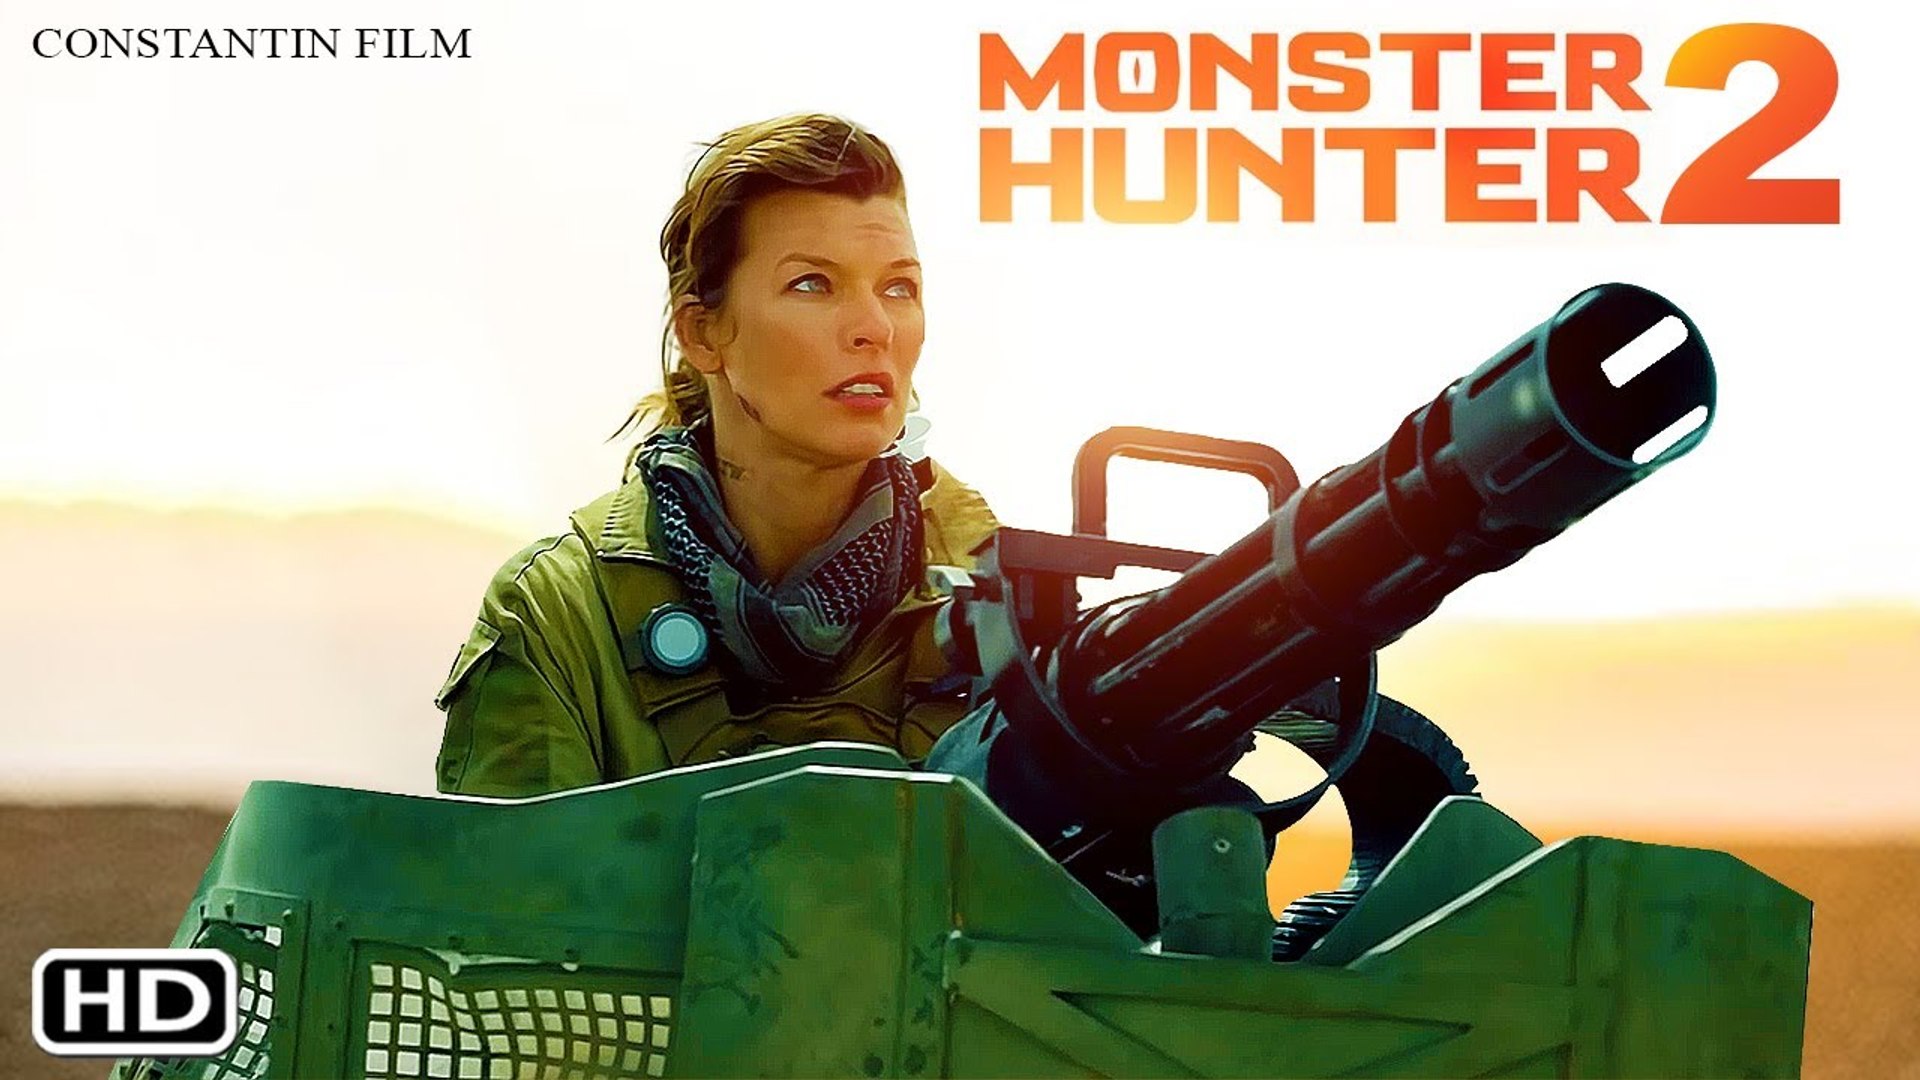 Monster Hunter 2 Trailer (2022) Milla Jovovich, Tony Jaa, Release Date,  Sequel, Ending, Preview - video Dailymotion